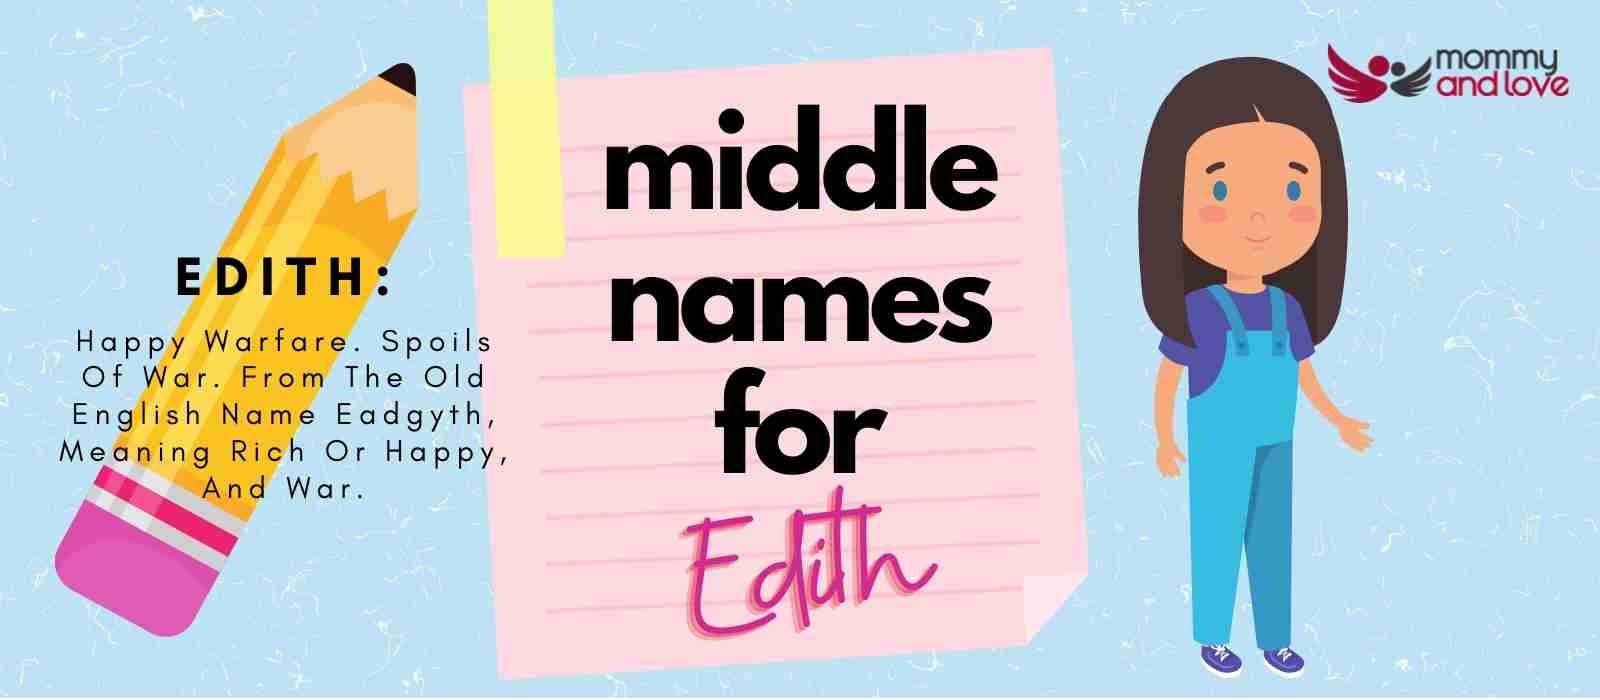 Middle Names for Edith